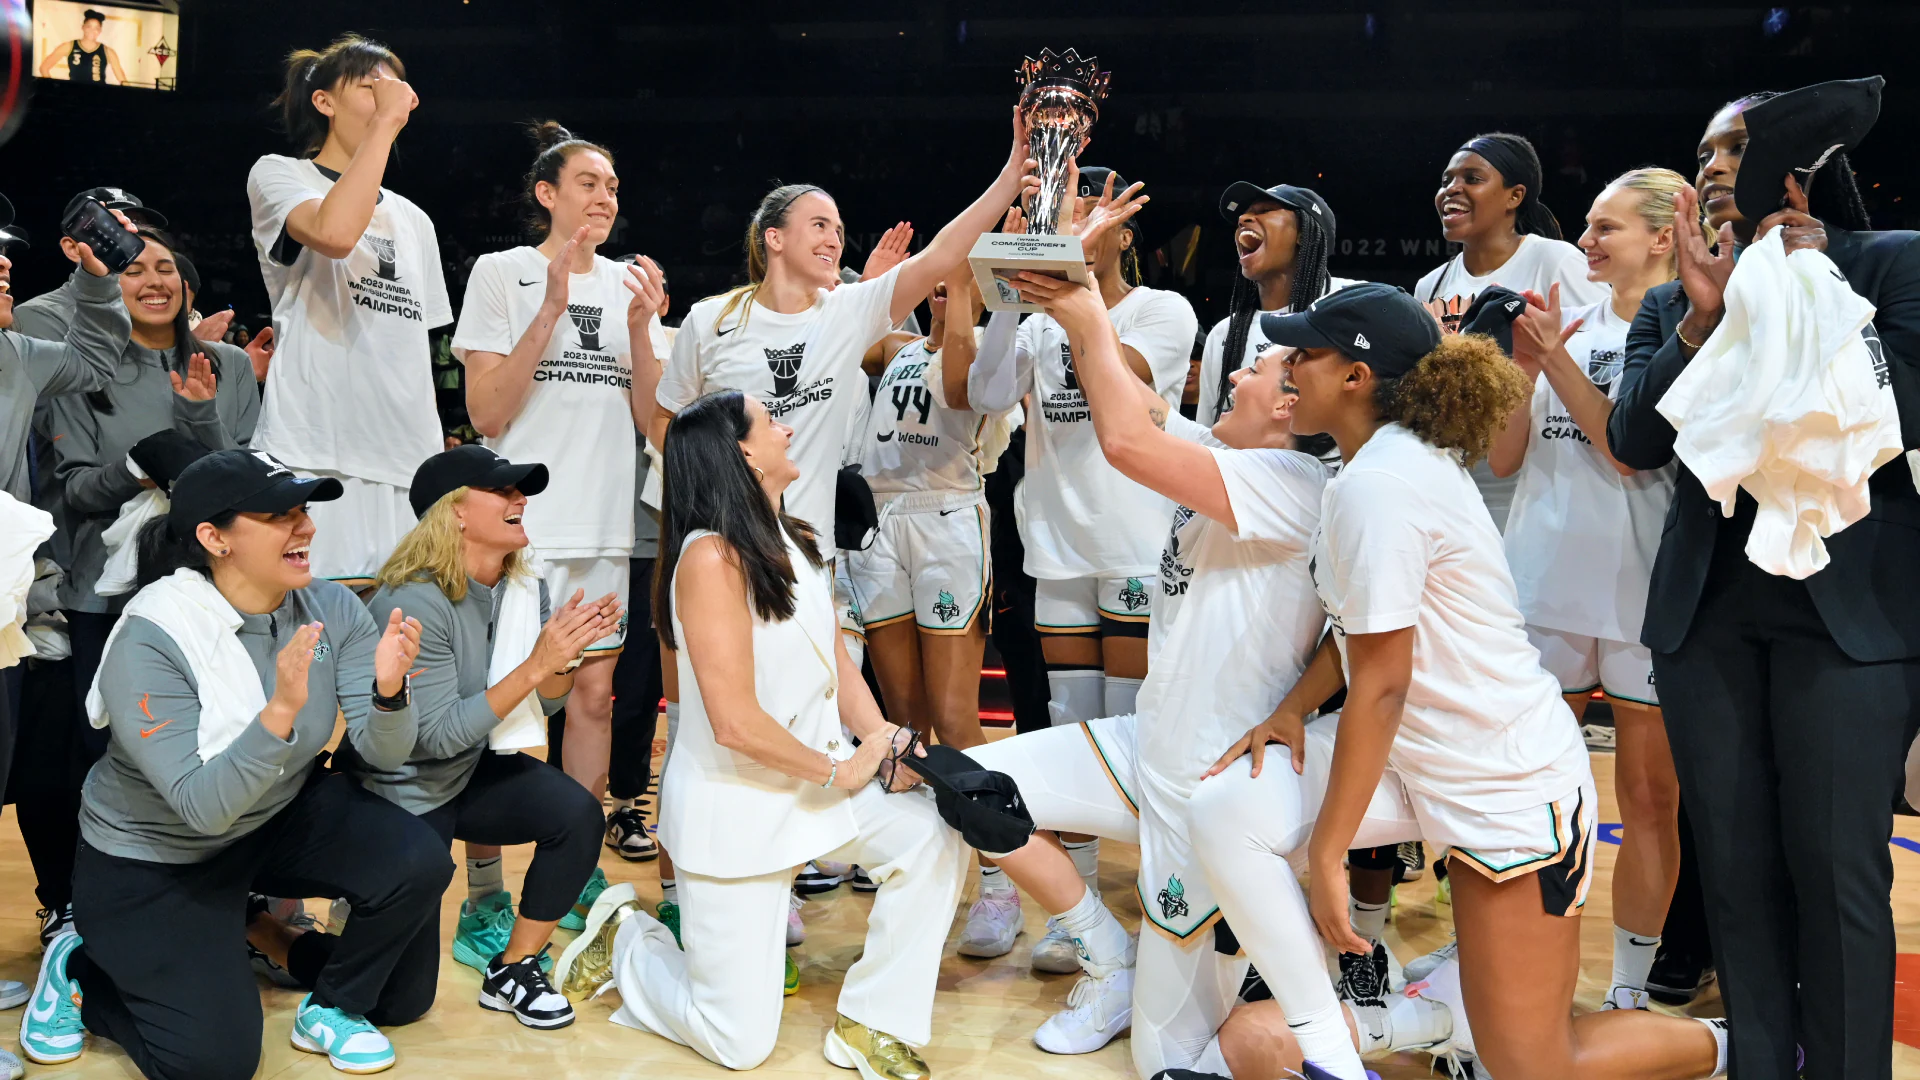 New york, new commissioner's cup champions